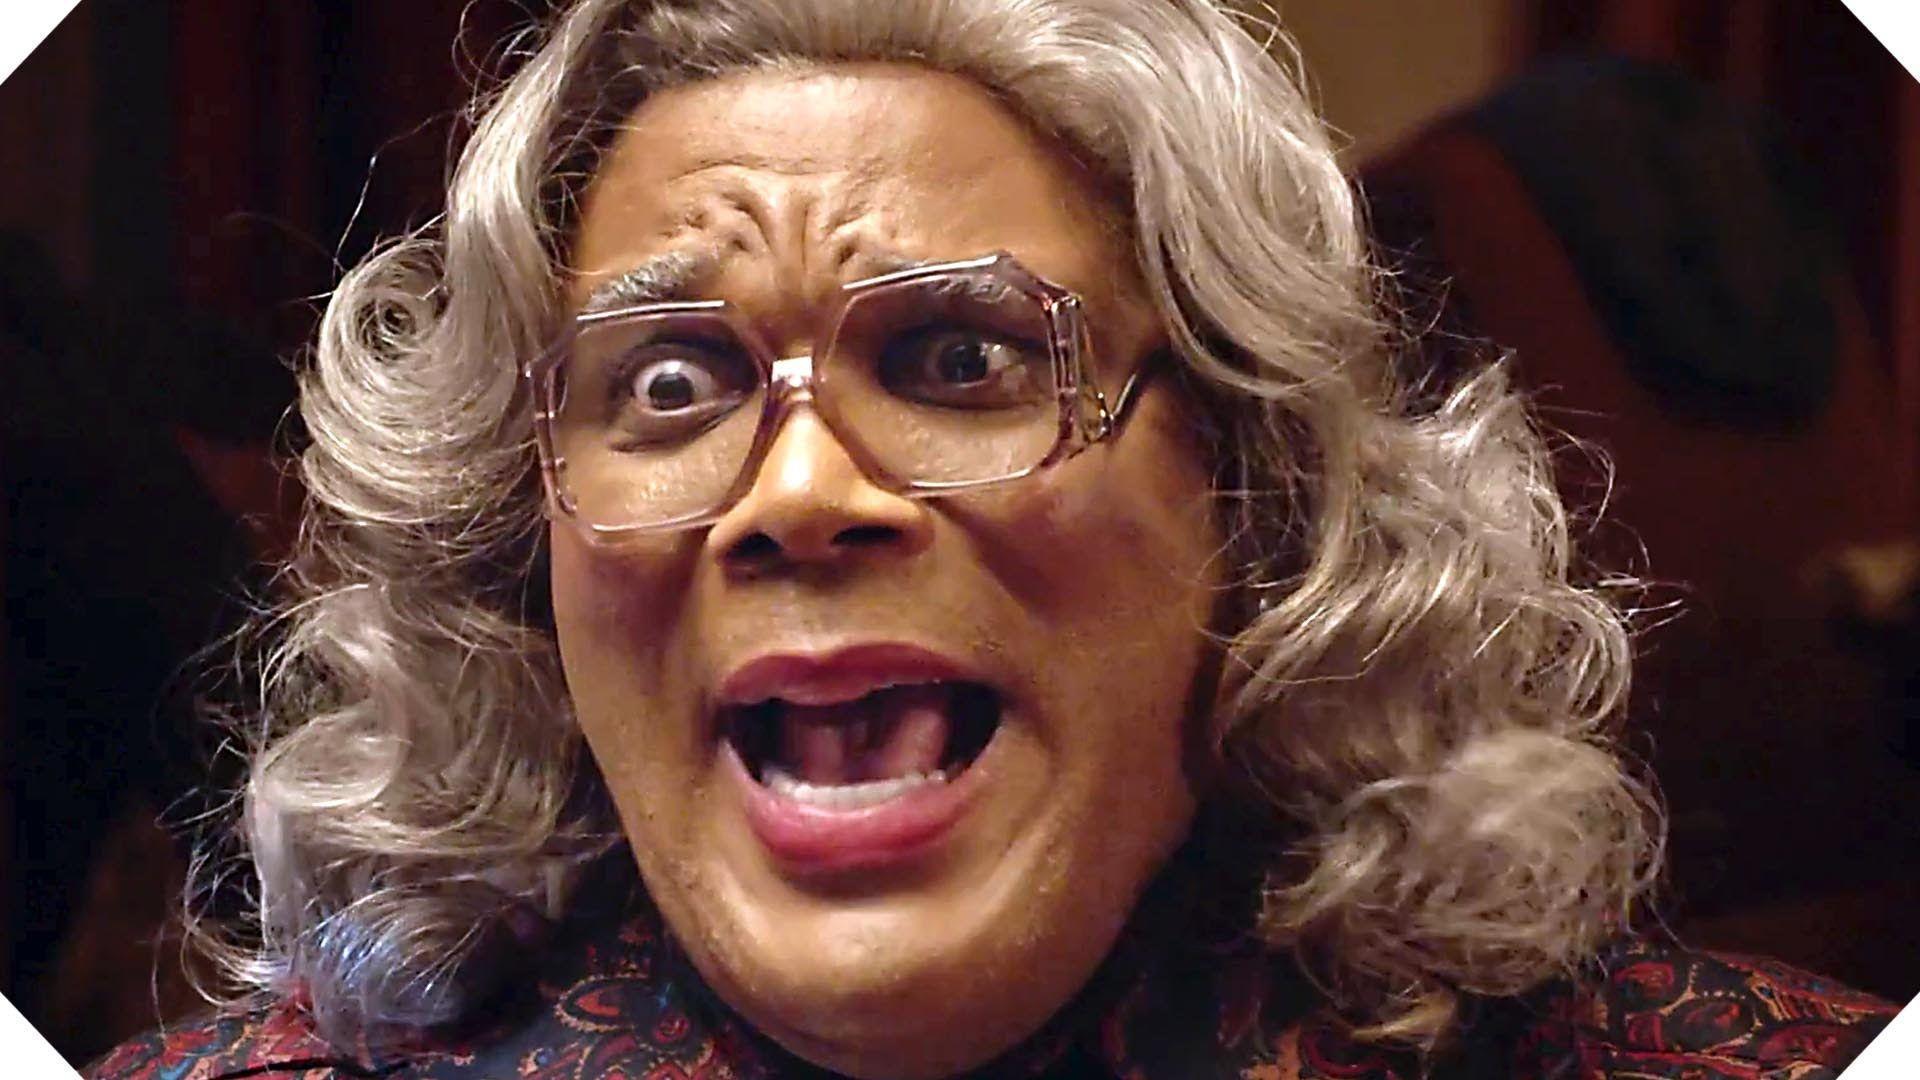 Boo! A Madea Halloween 2016 HDRip AAC With Subs Babes download